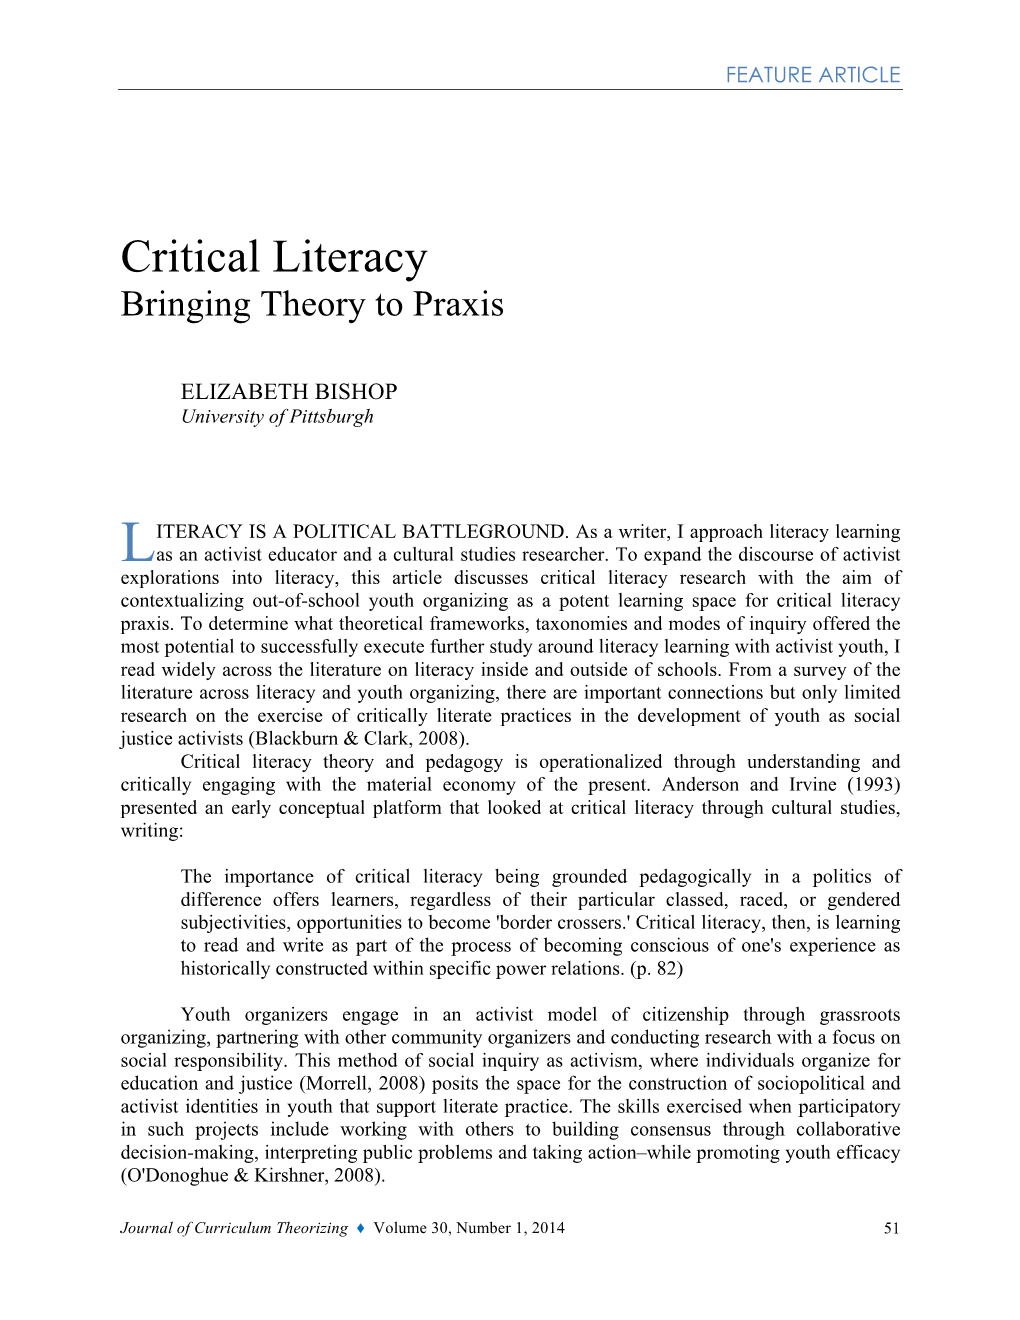 Critical Literacy Bringing Theory to Praxis